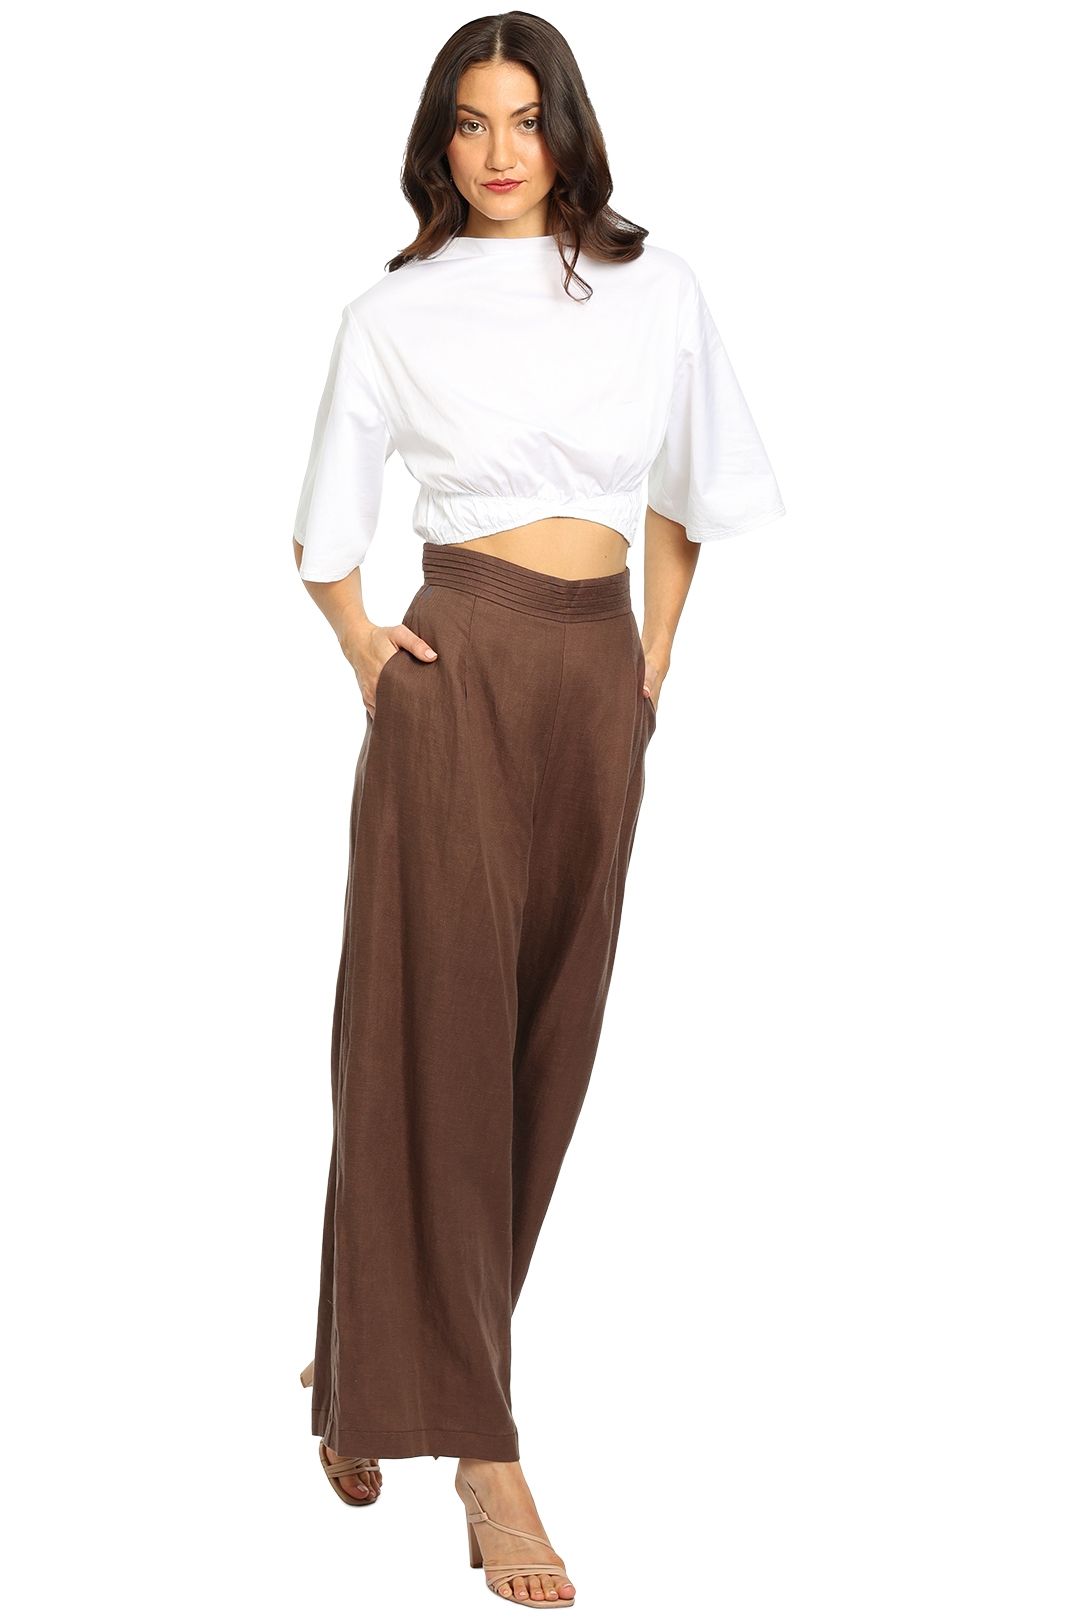 Ministry of Style Elysian Wide Leg Pant Brown